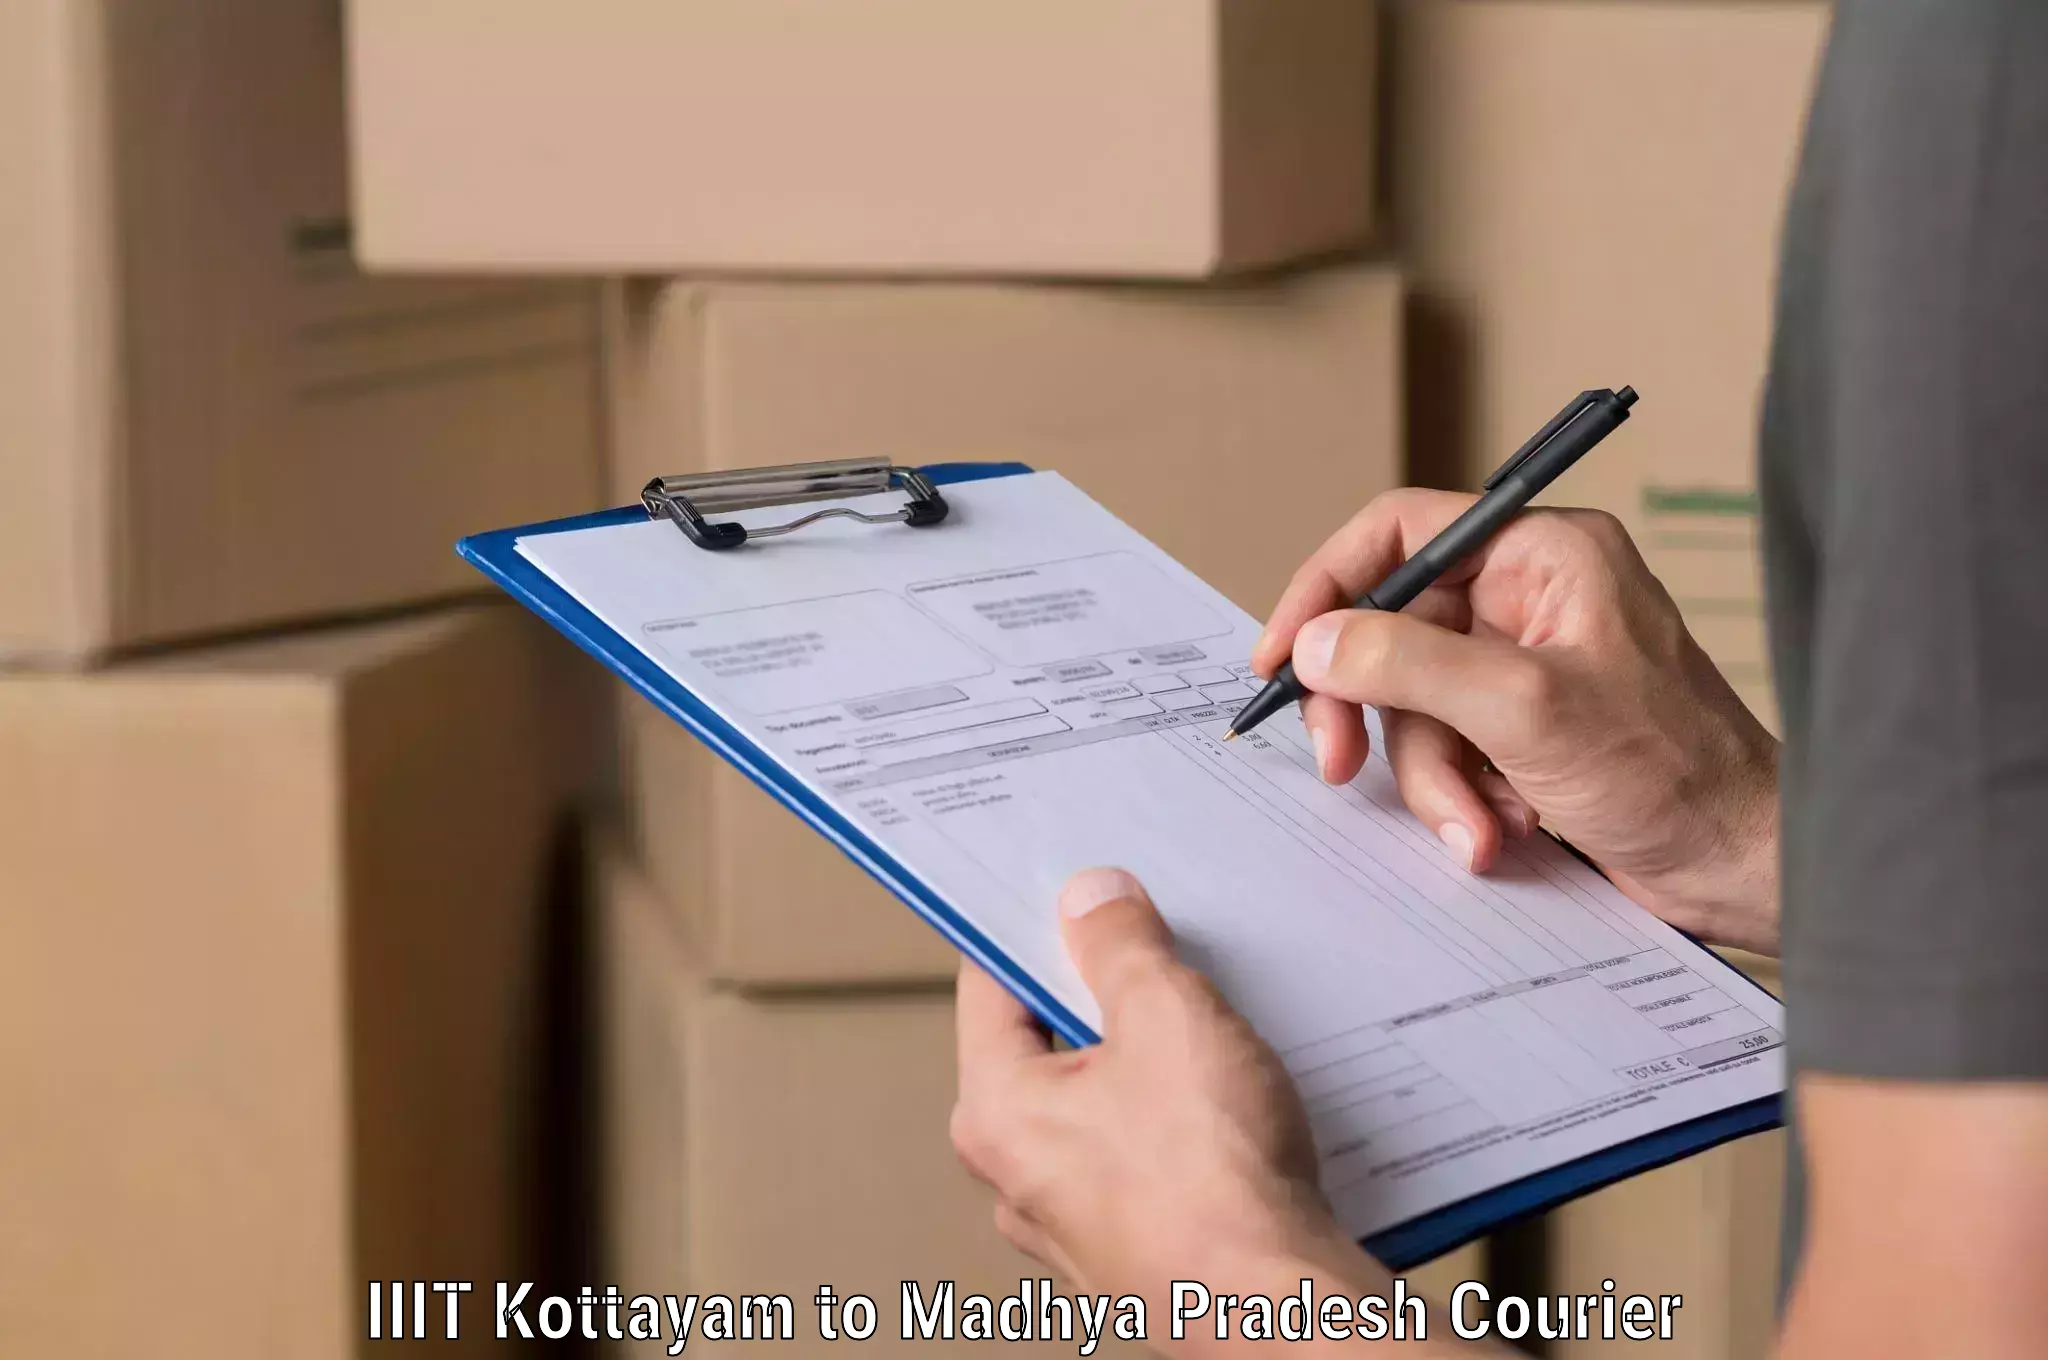 Global courier networks IIIT Kottayam to Anuppur